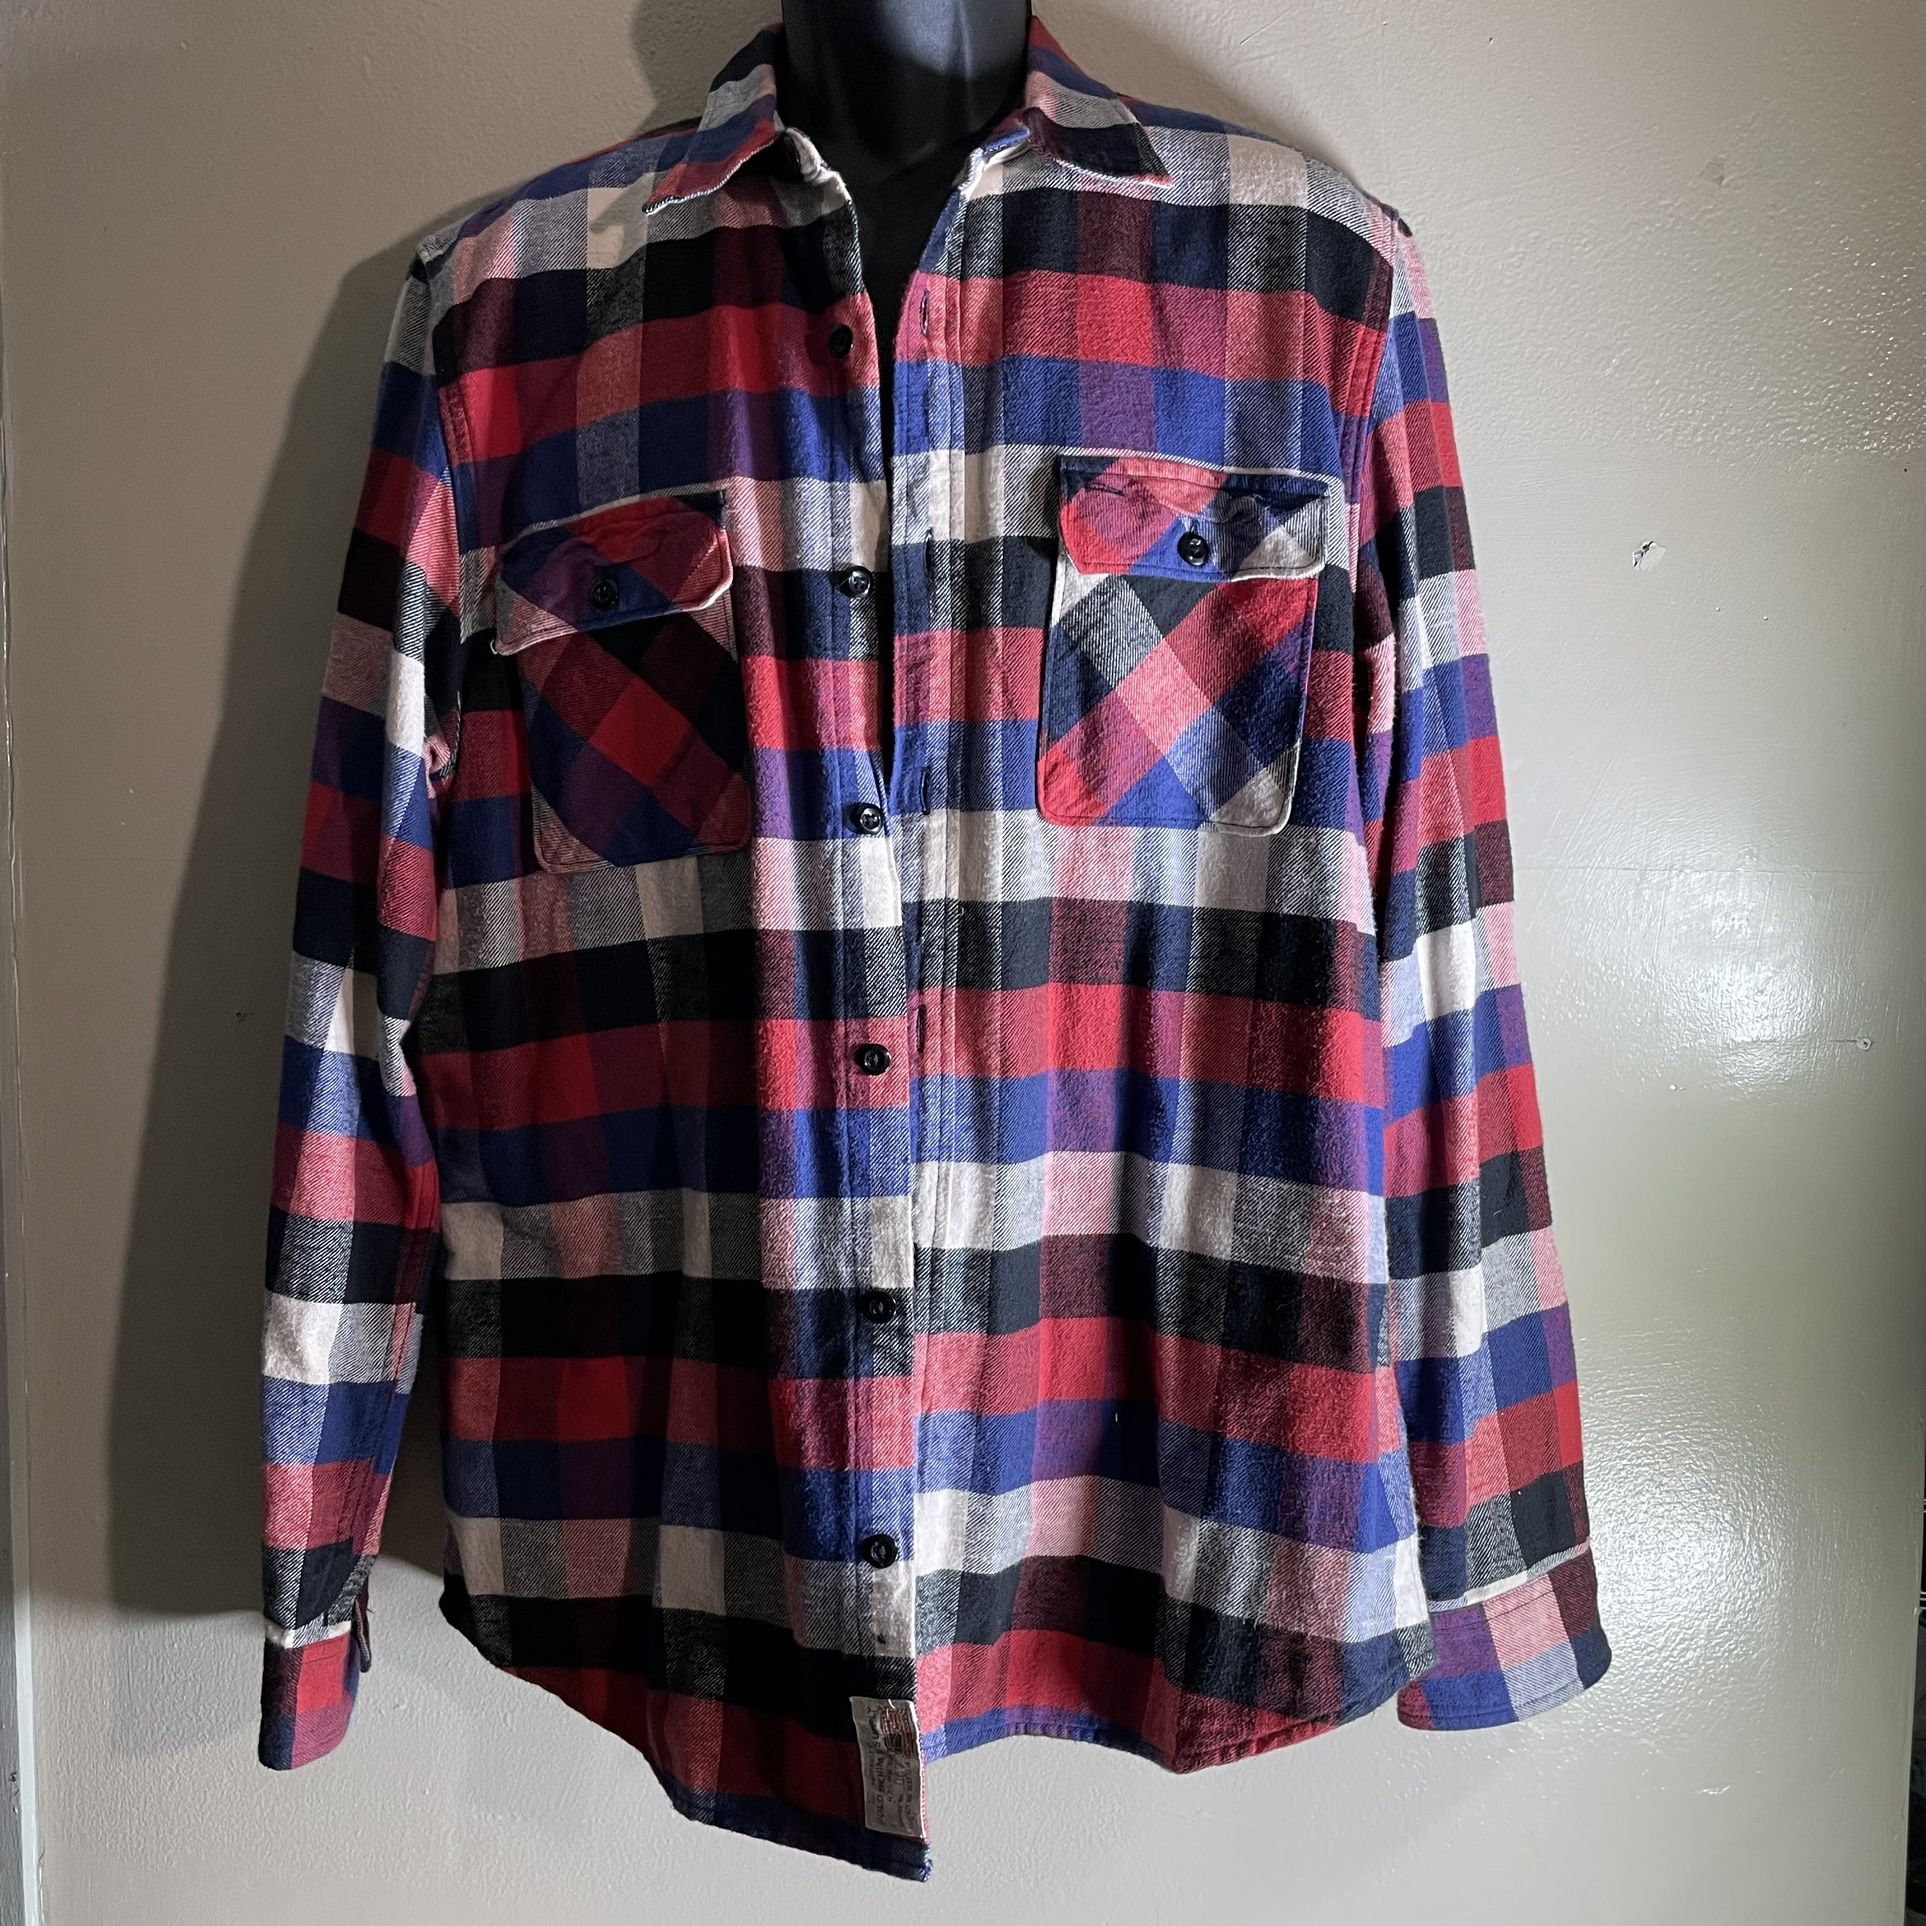 Denim Supply Co Ralph Lauren Mens Button Up Shirt Sz XL Plaid Pocket Long Sleeve.  Beautiful nice flannel Has a great weight to it Feels so comfortabl